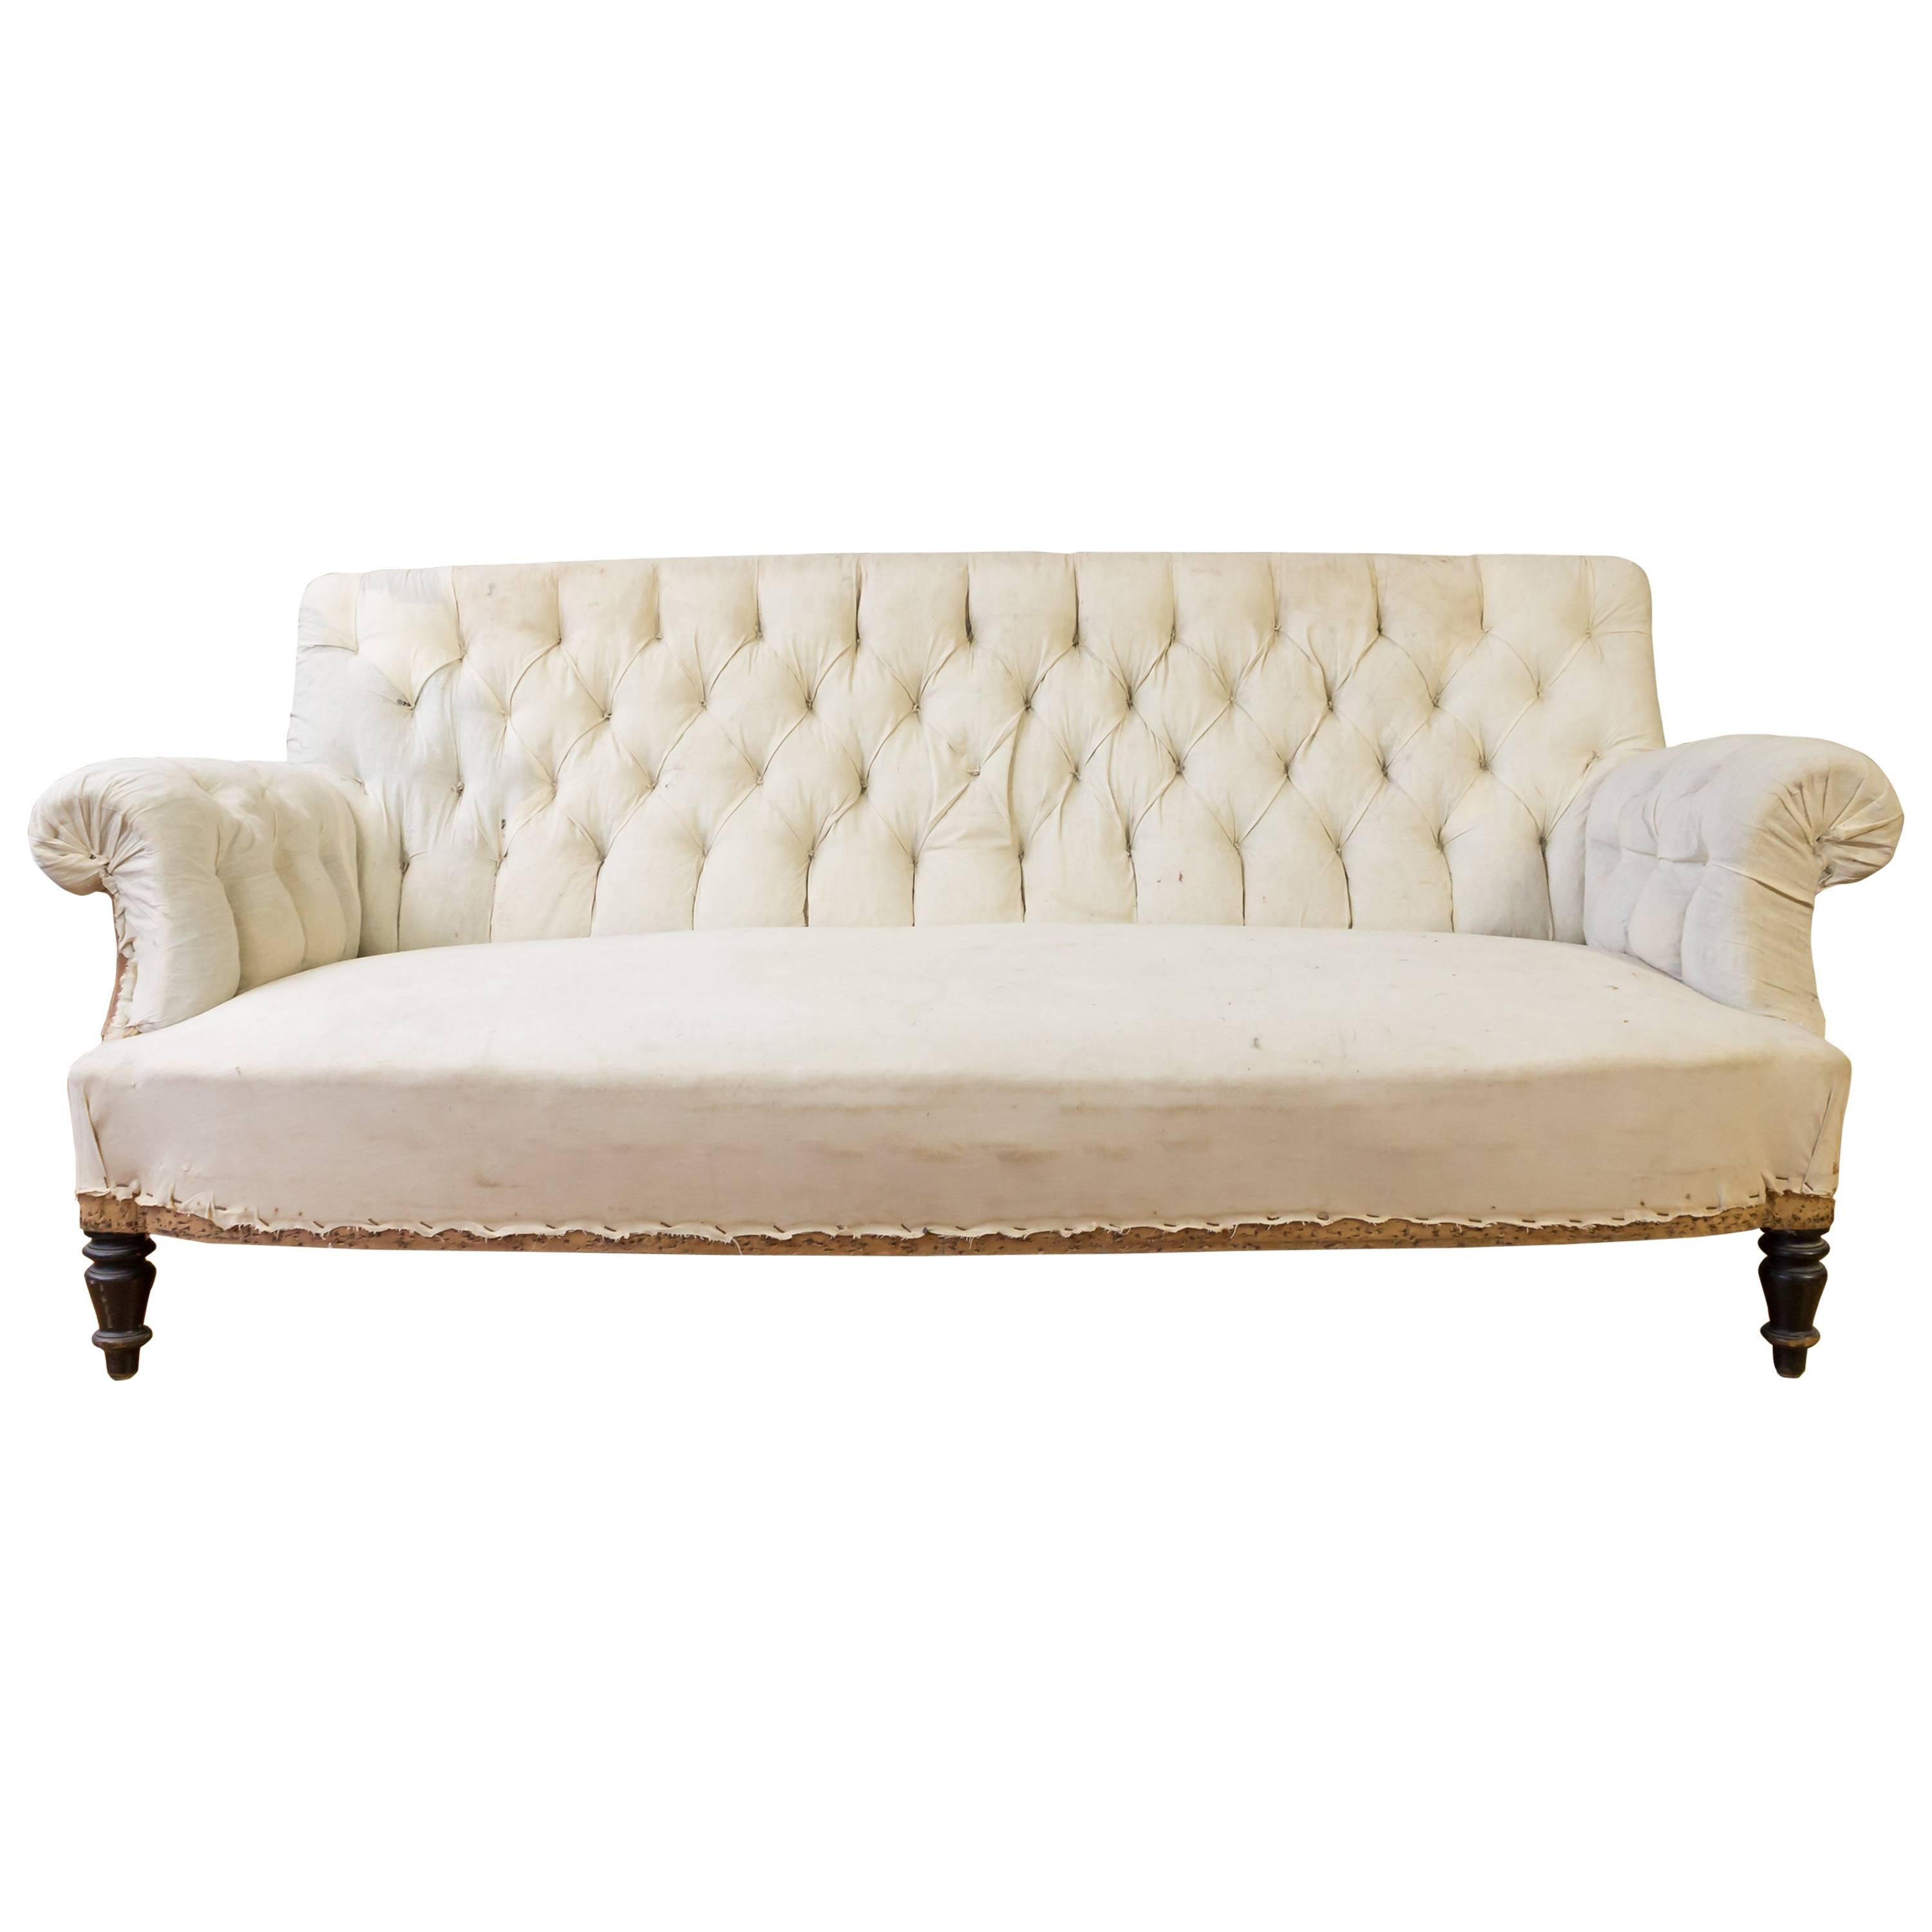 19th Century French Tufted Sofa